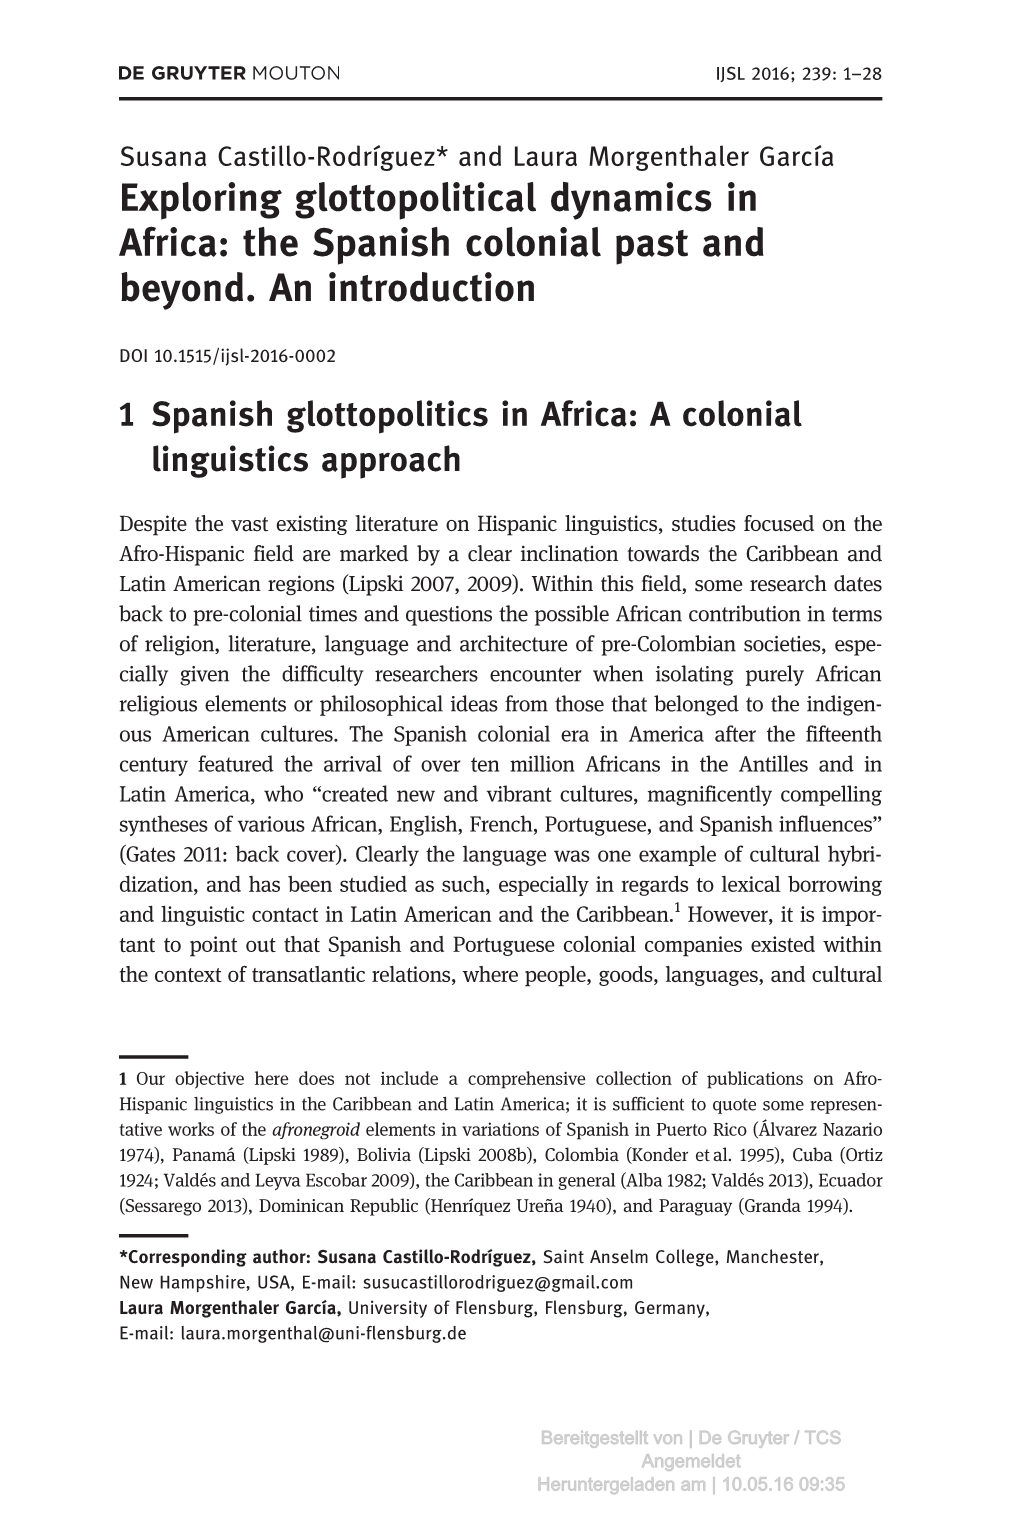 Exploring Glottopolitical Dynamics in Africa: the Spanish Colonial Past and Beyond